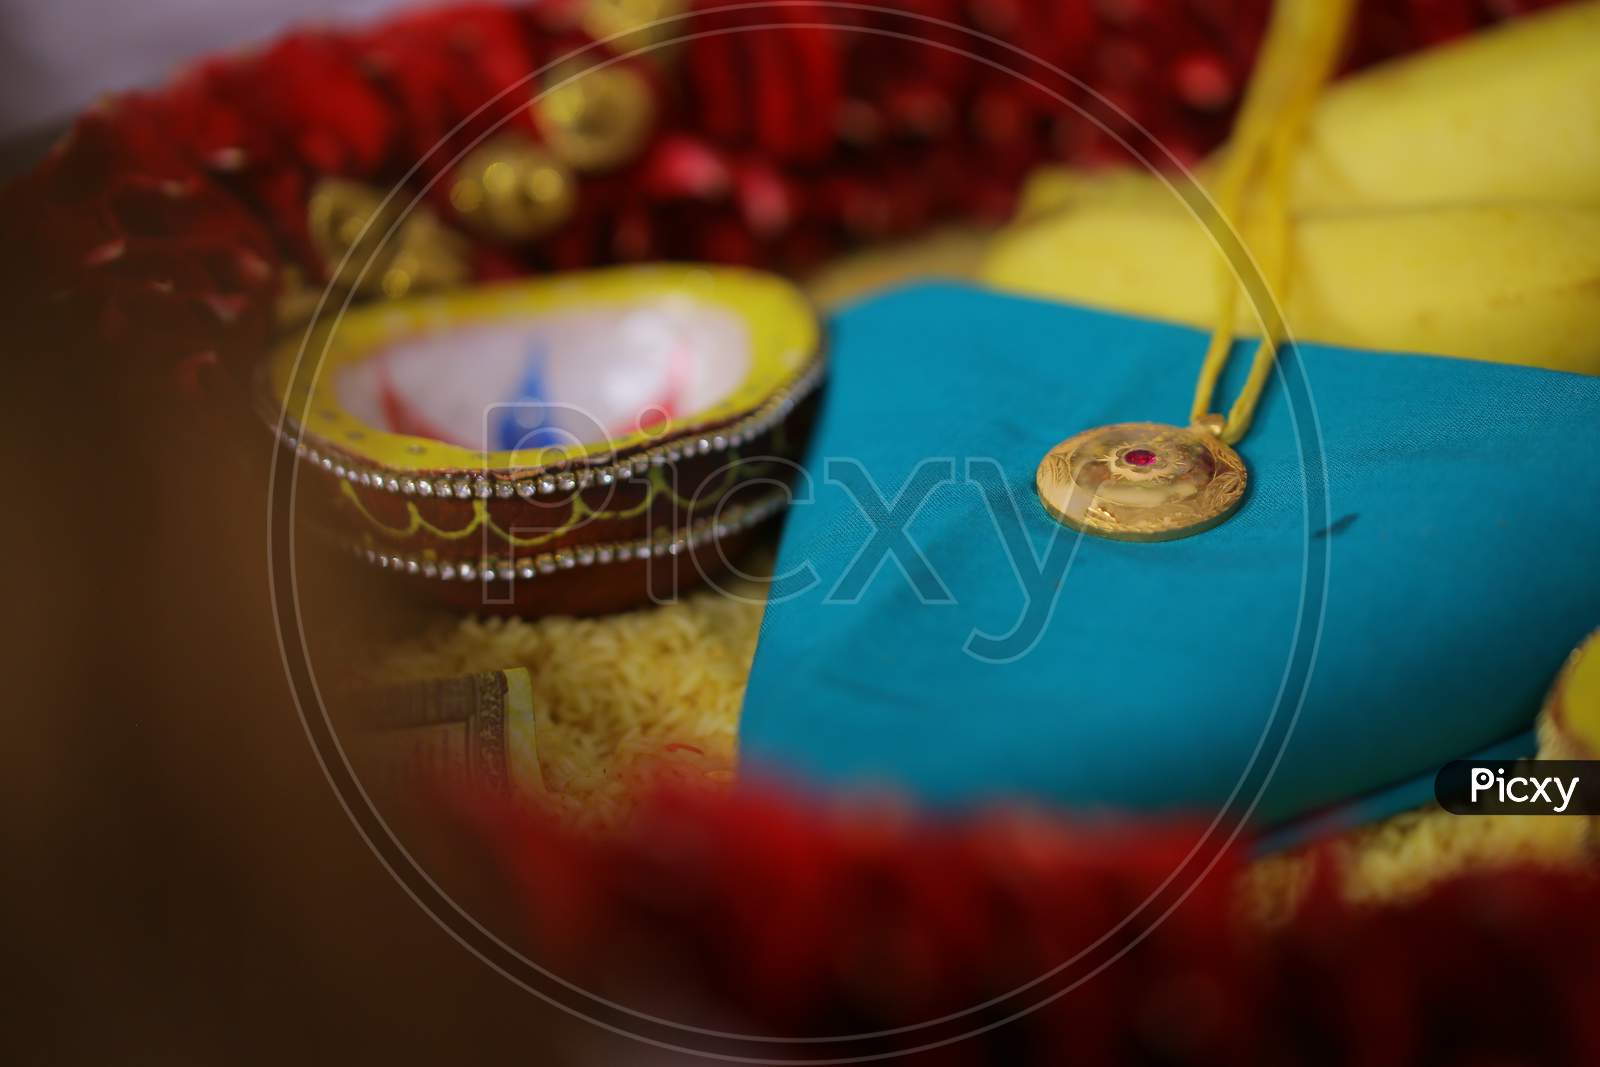 View of Mangalsutra during South Indian Wedding Puja